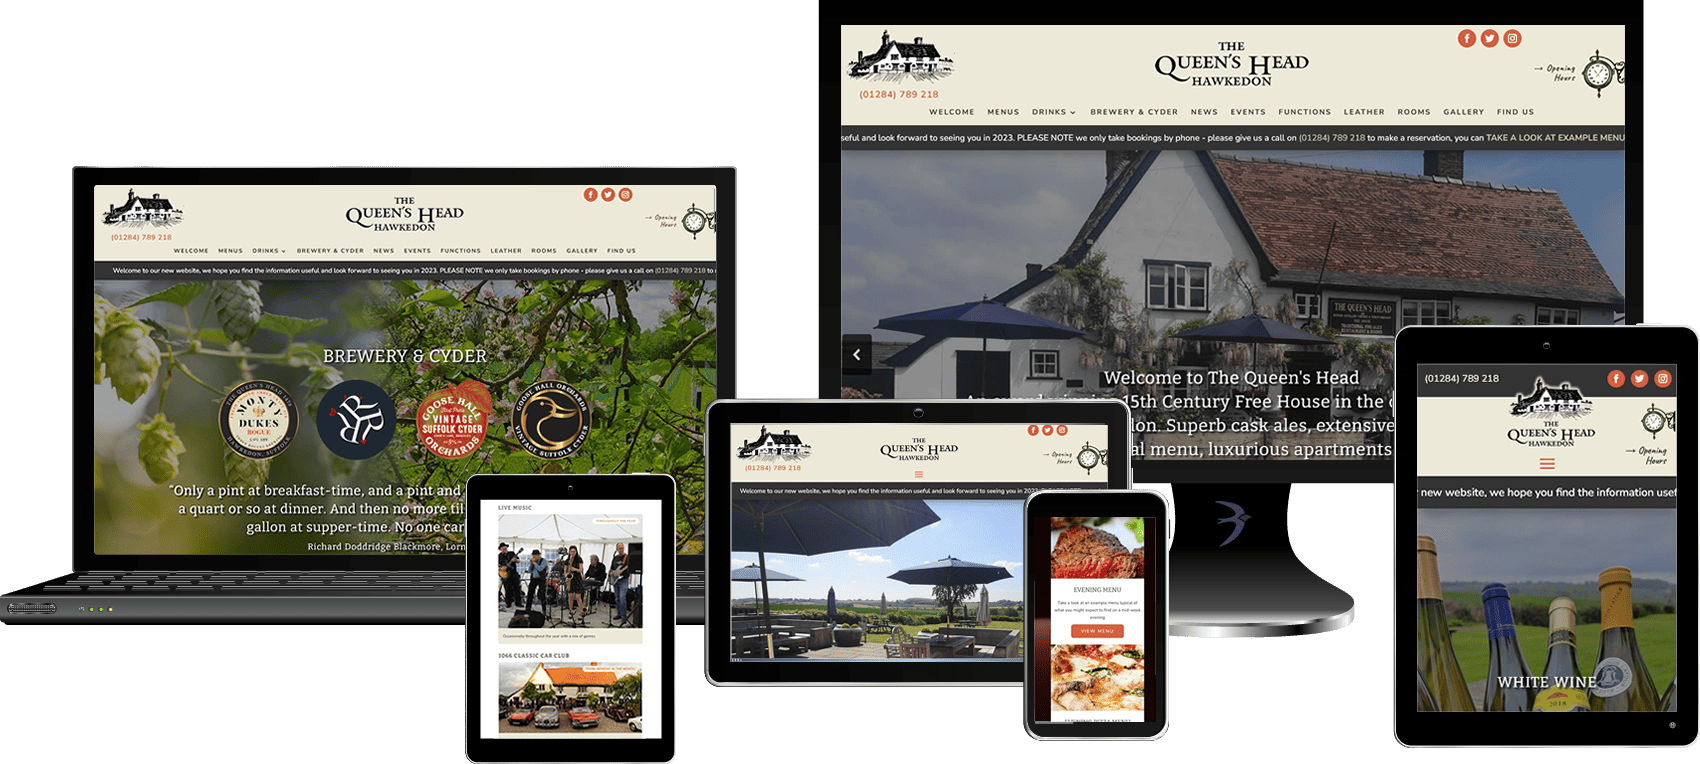 Hawkedon Queen Pub website redesign by Mdsign